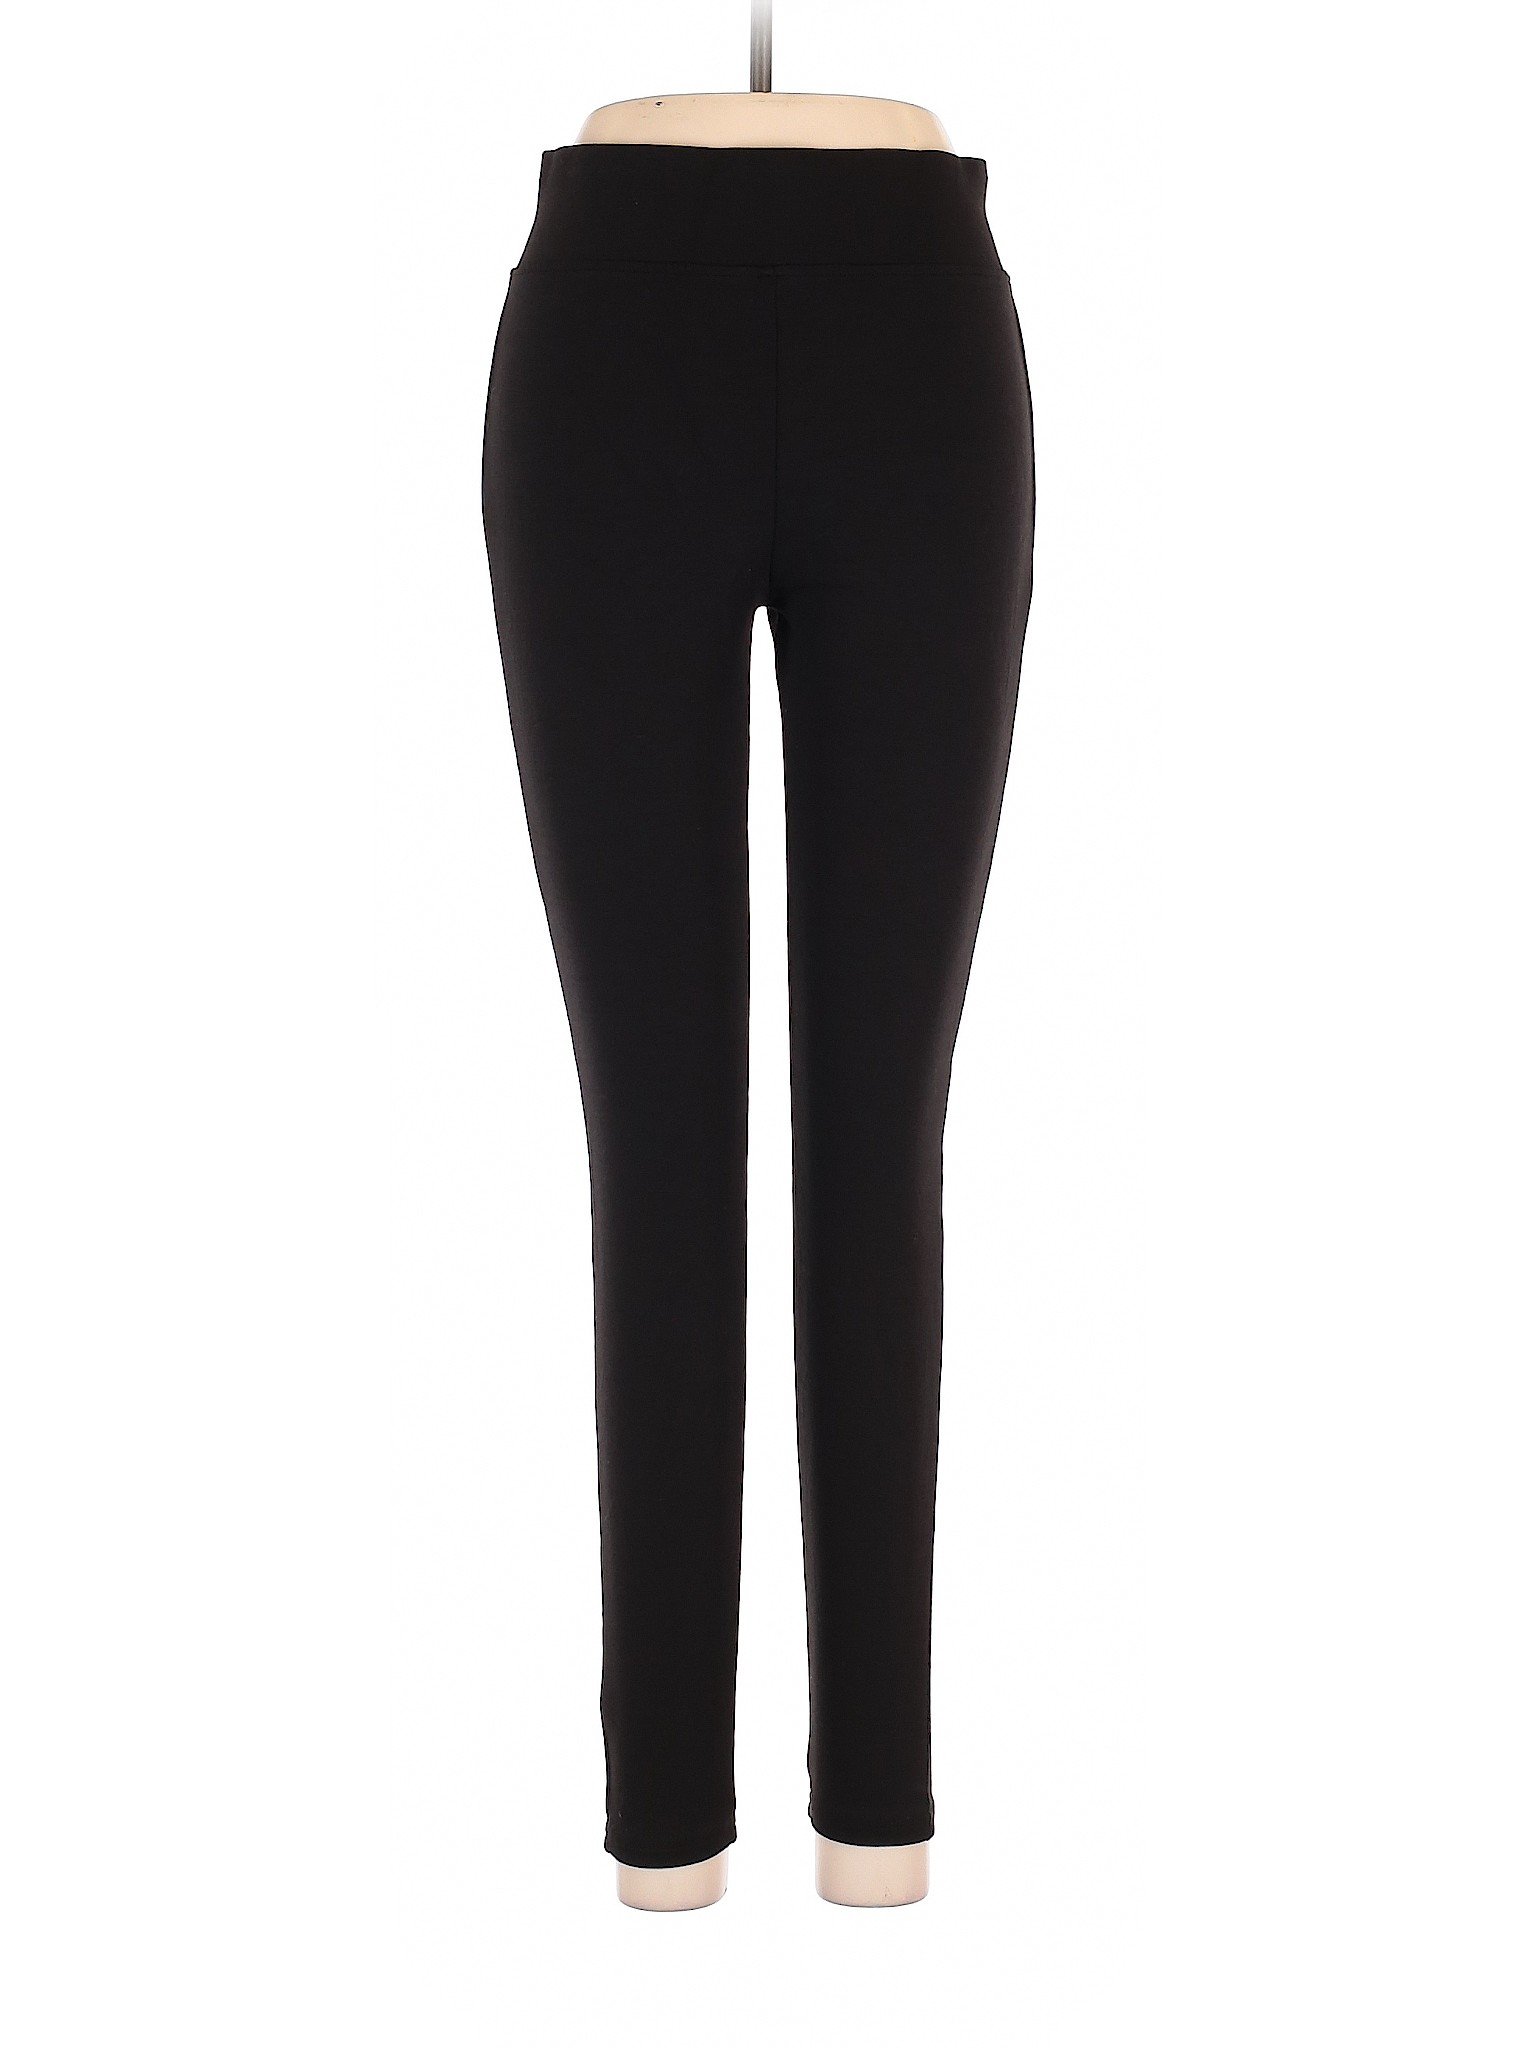 Women's High Waisted Drawstring Lounge Leggings with Pockets - A New Day™  Black XL